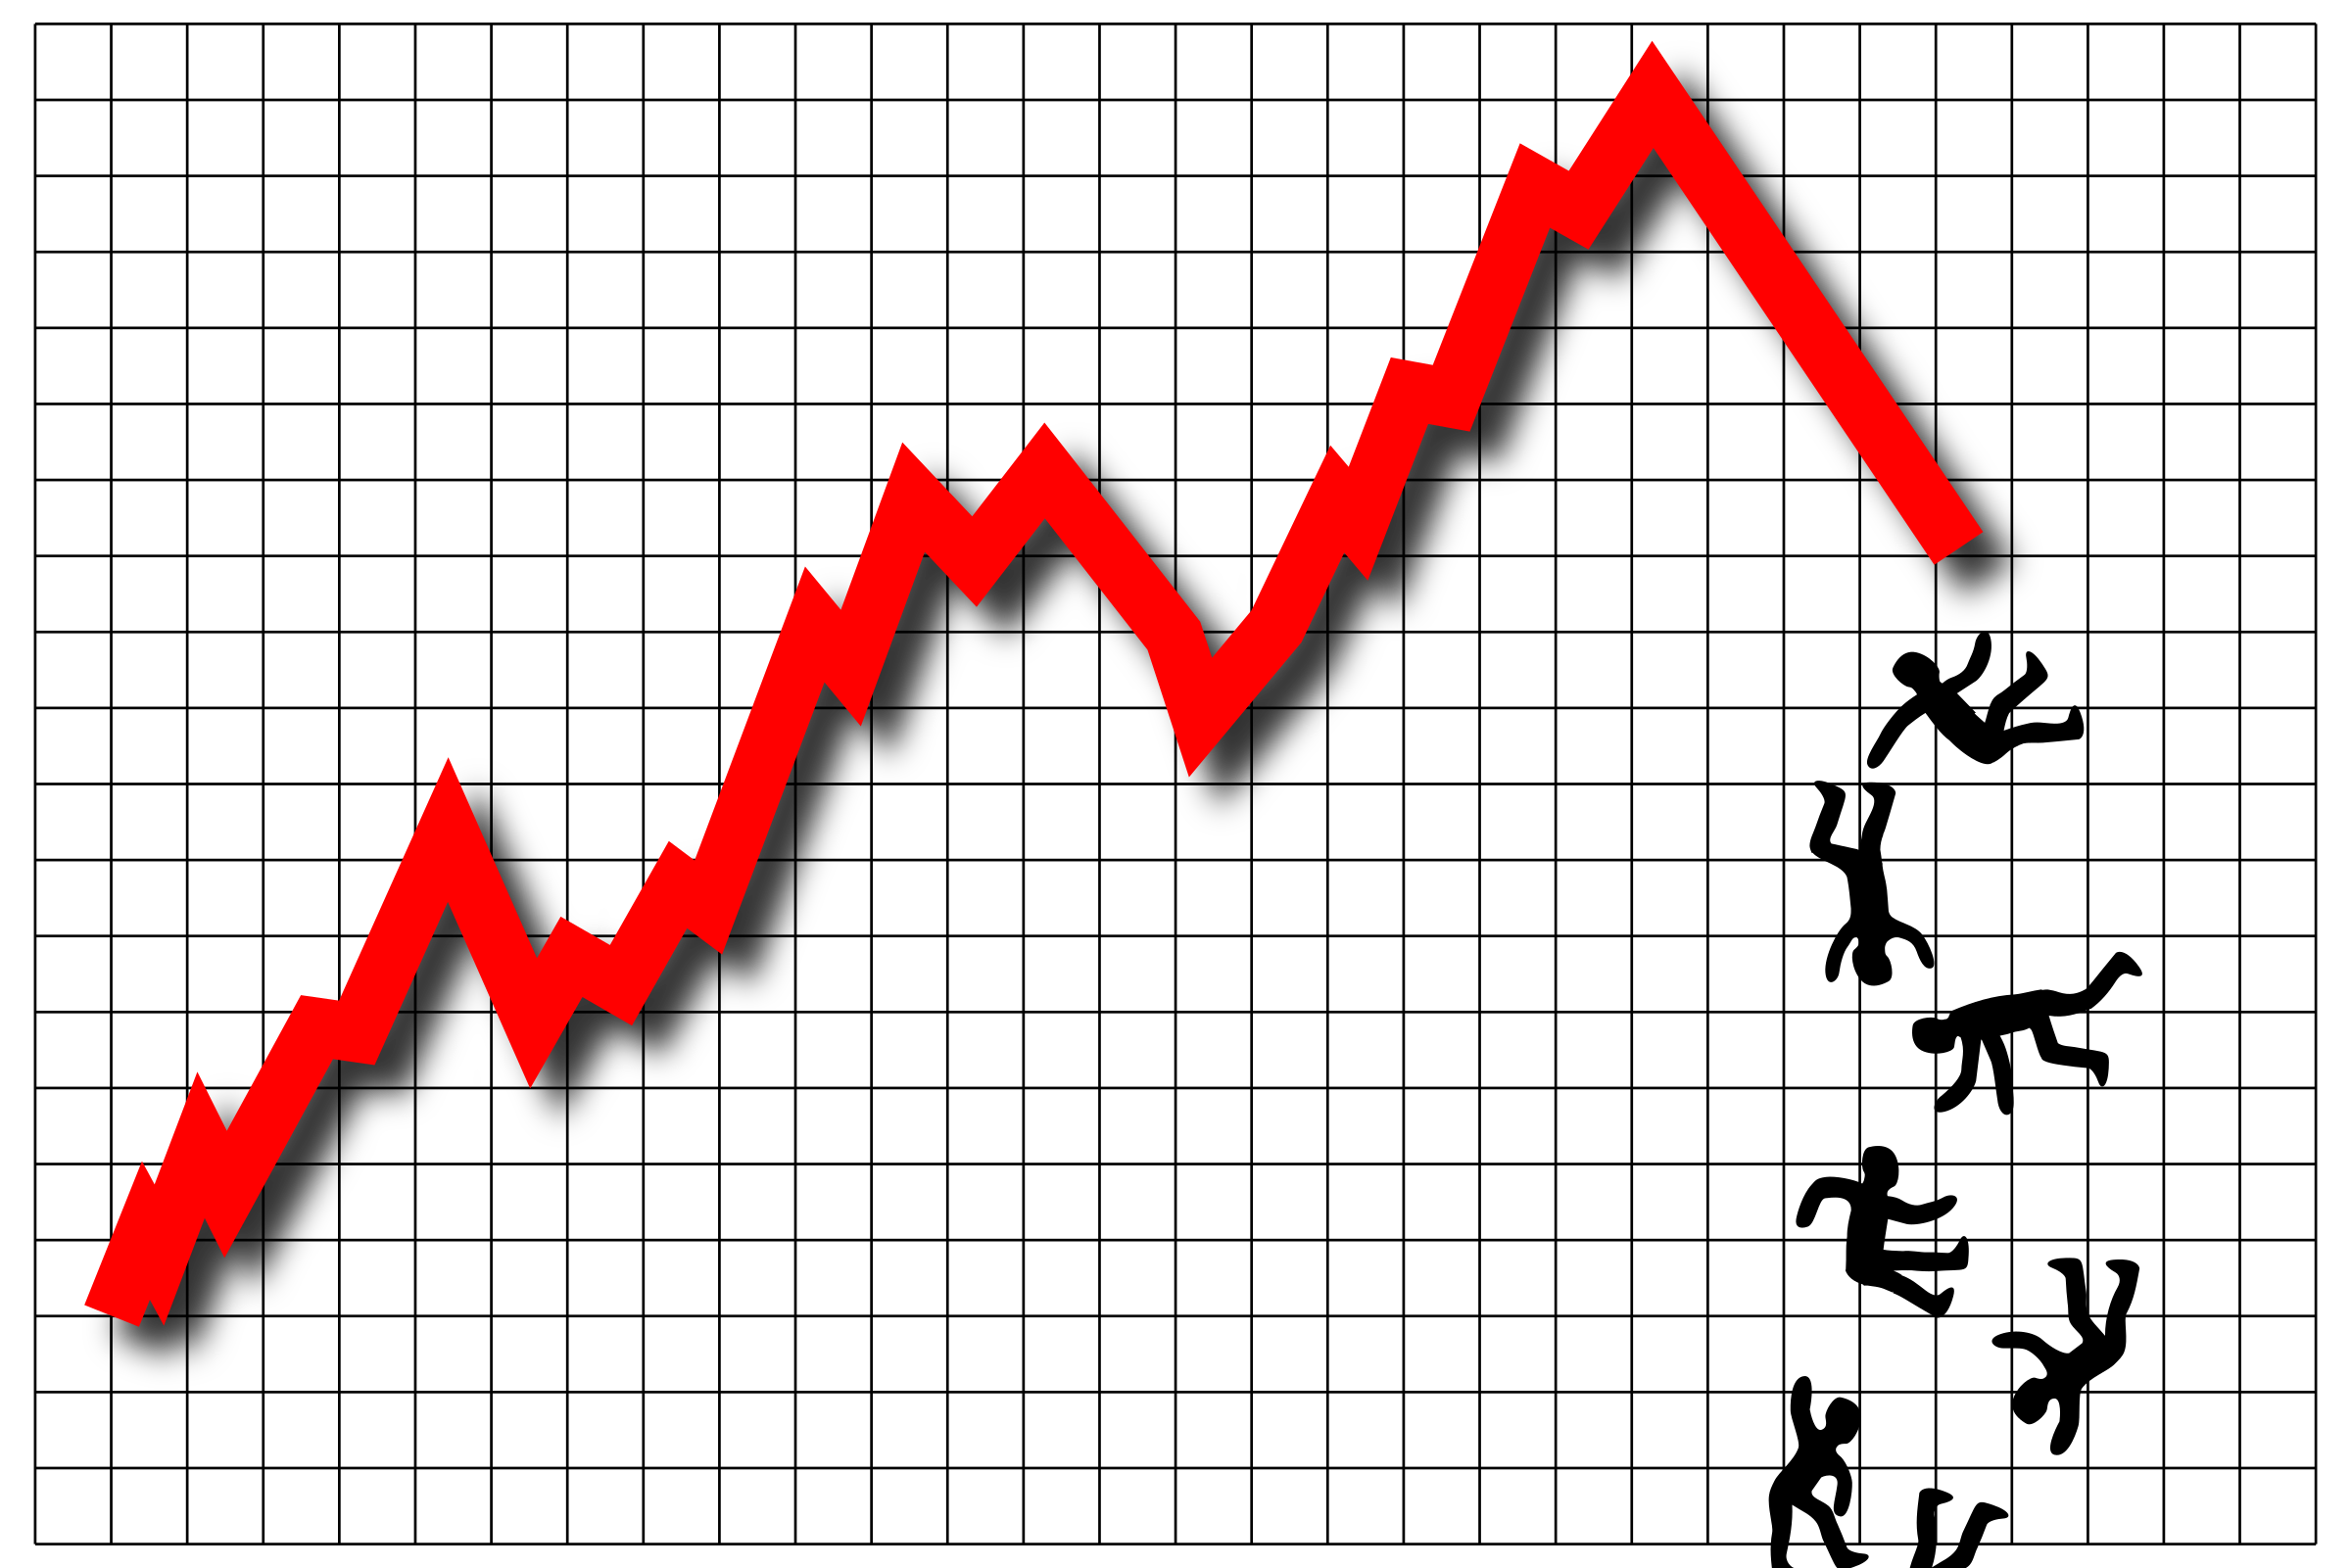 Clipart image of a falling stock market.